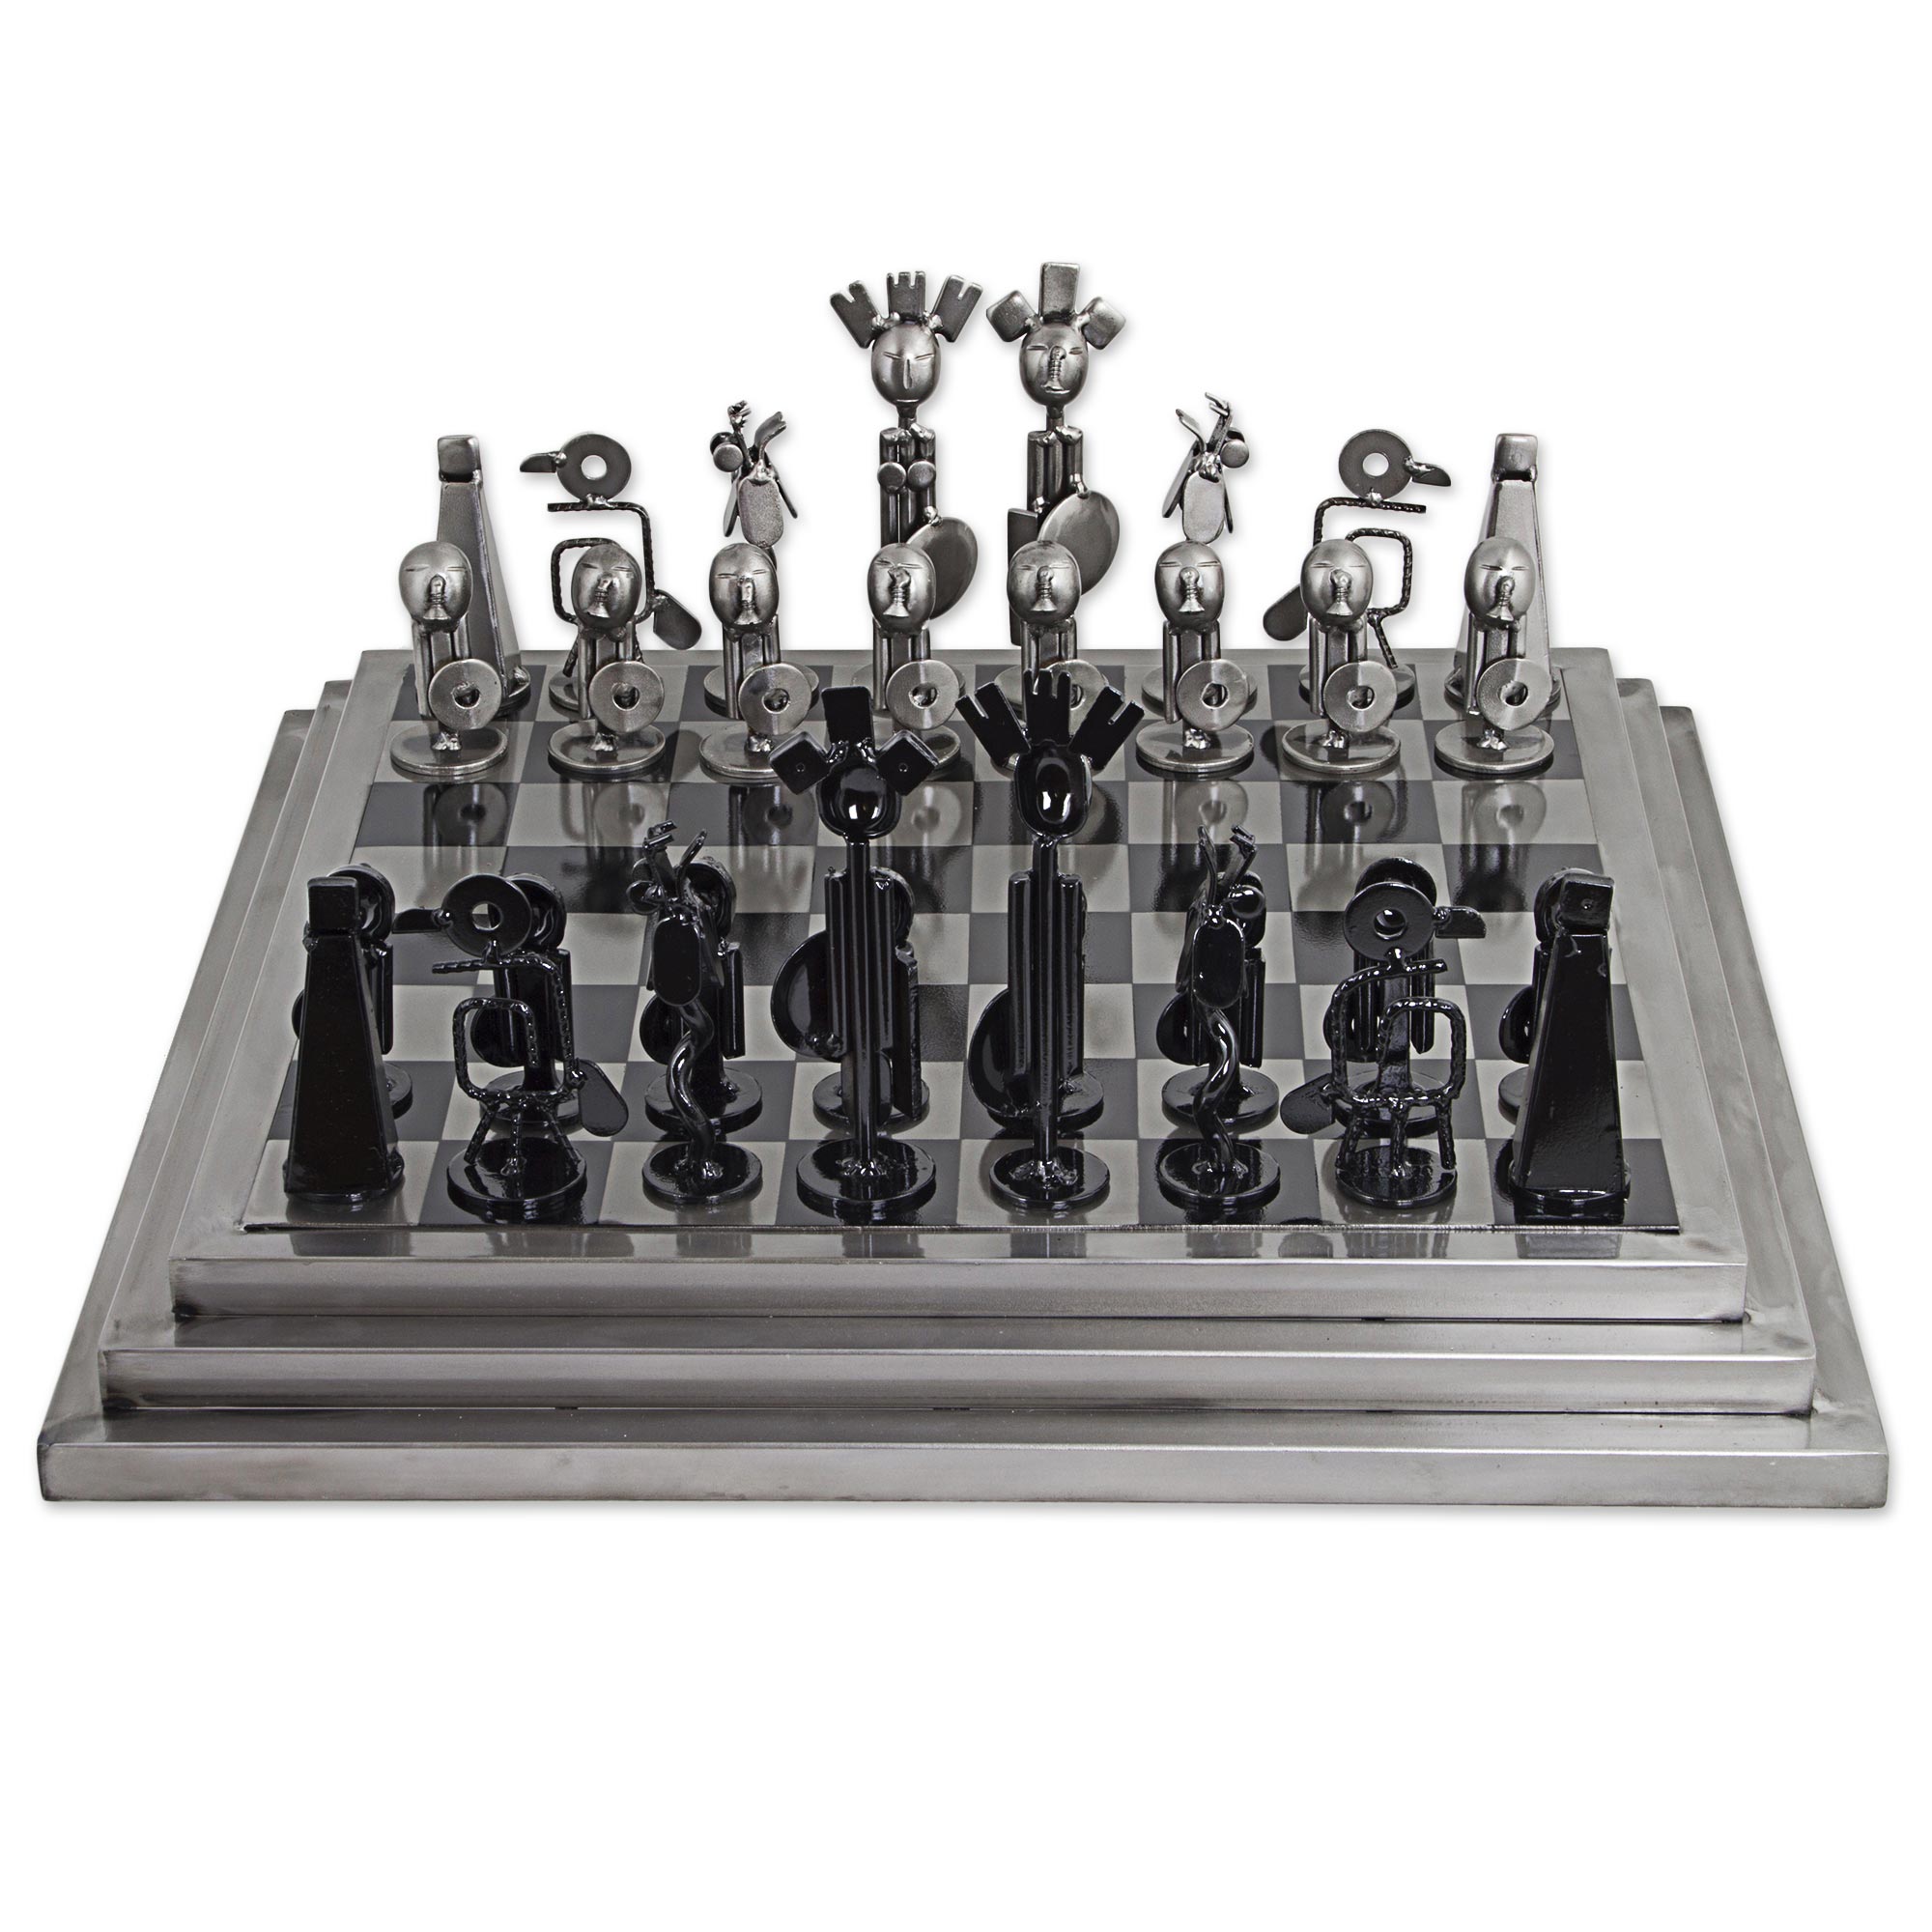 Reclaimed Auto Part Chess Set (Elevated) –